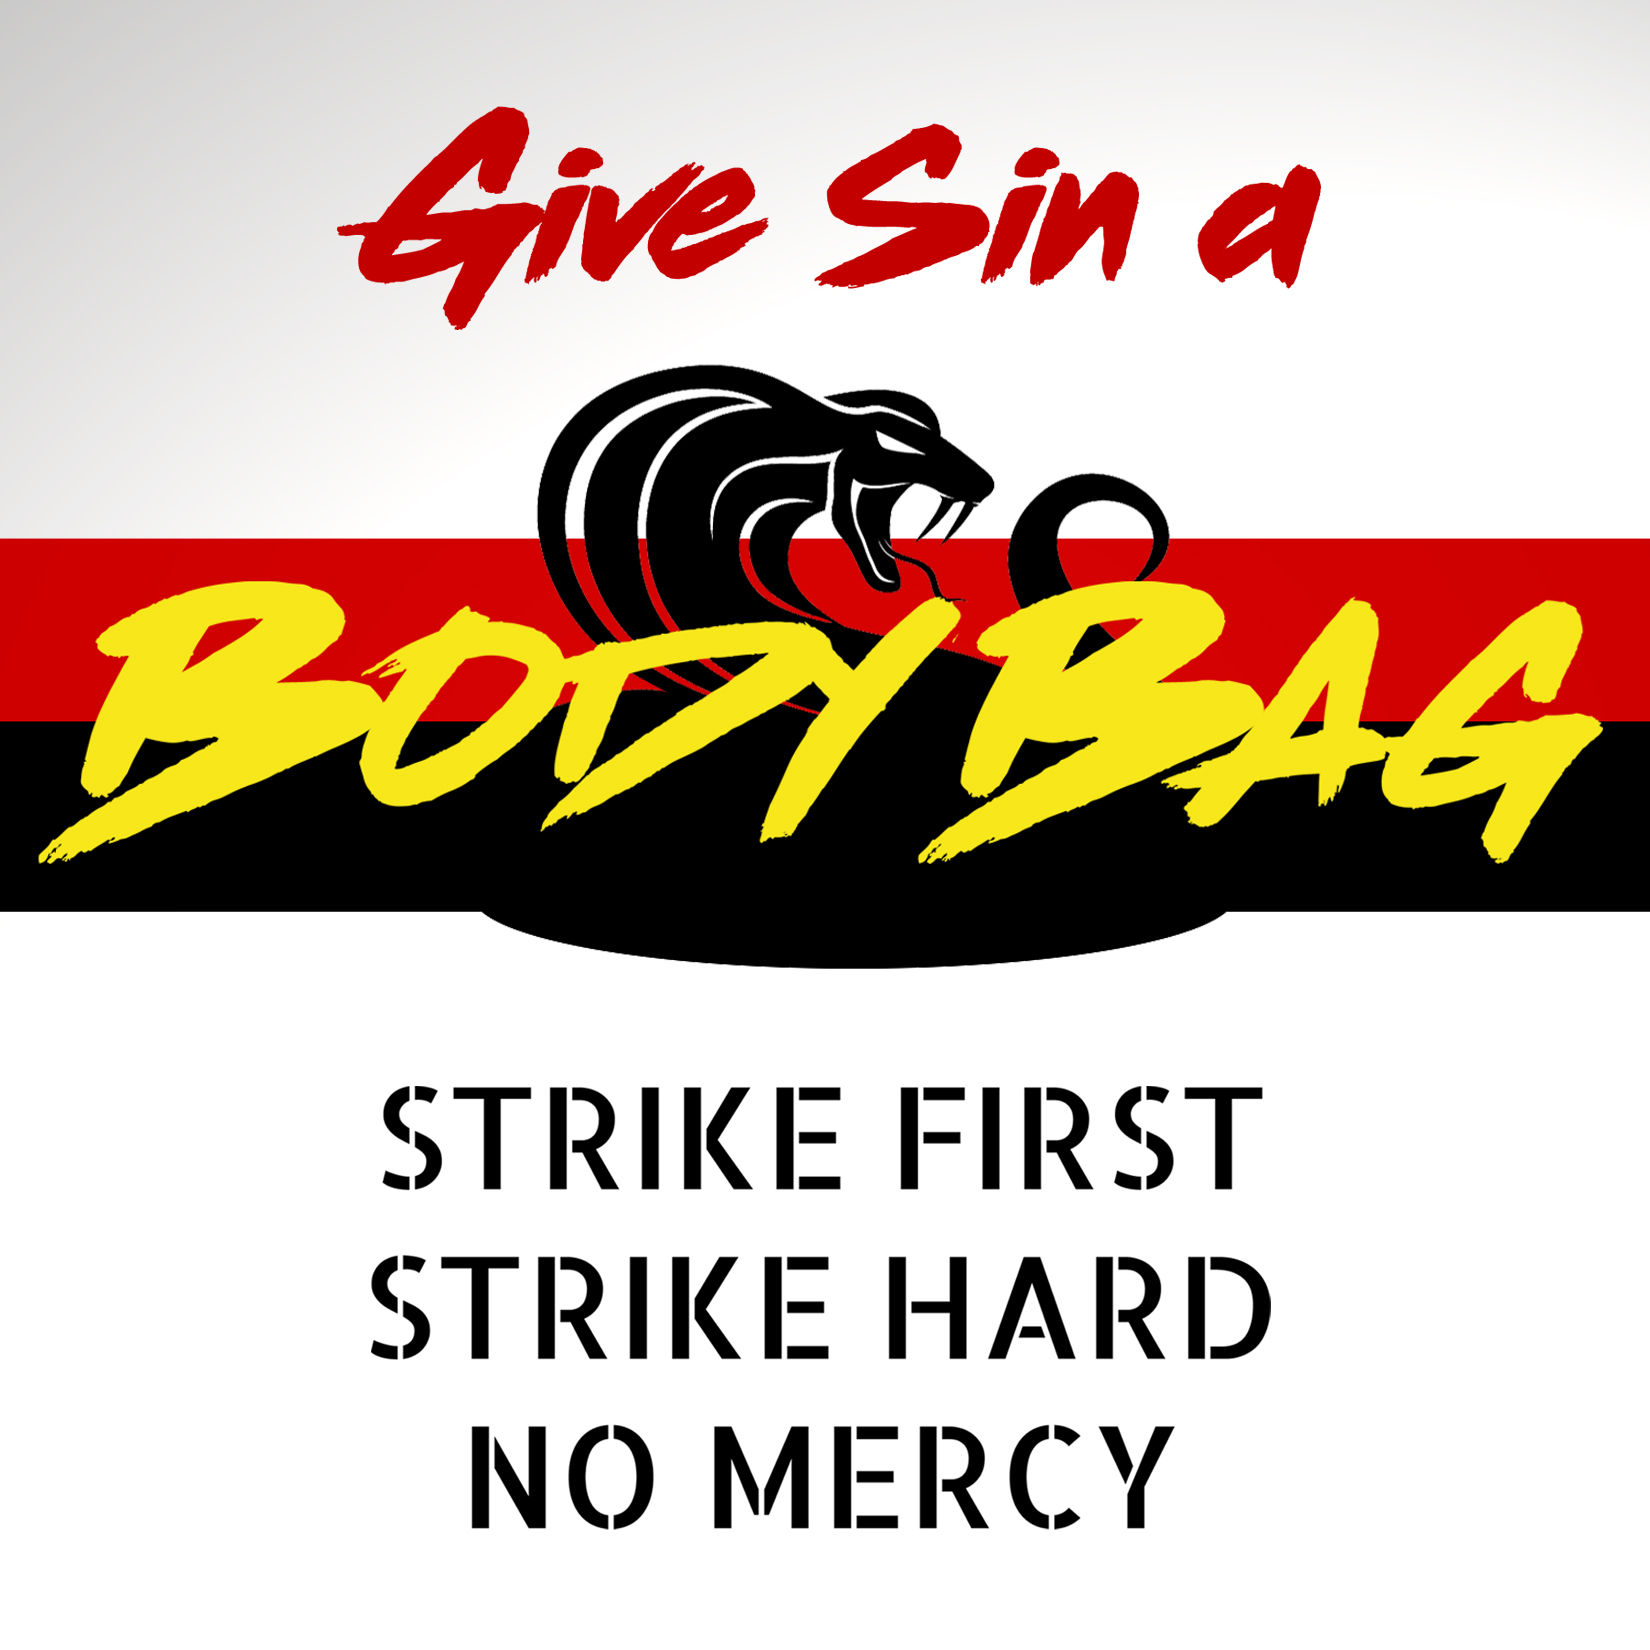 INTRODUCING: Give Sin a Body Bag